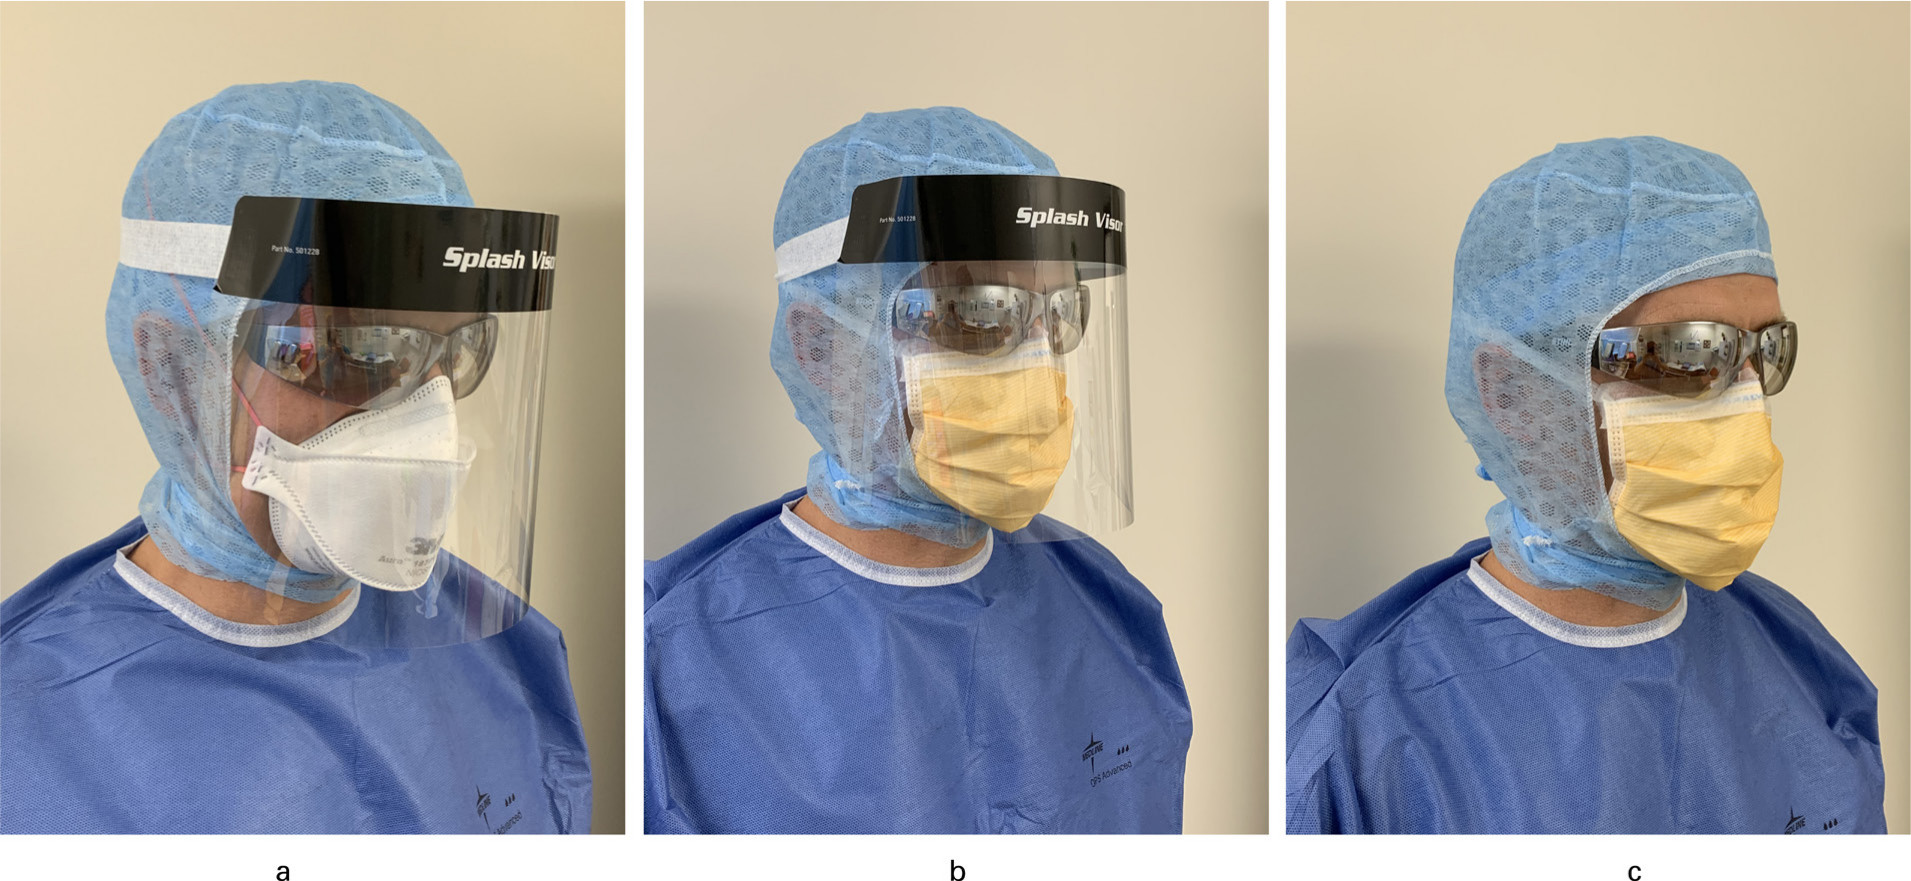 Fig. 1 
          Advised PPE use in different scenarios. a) COVID-19 positive case and suspected cases: N95 respirator, goggles, surgical balaclava, face shield, gown and double gloves. b) Non-COVID-19 case with high risk of aerosolization: taped surgical mask, goggles, surgical hood, face shield, gown and double gloves. c) Non COVID-19 case with low risk of aerosolization: taped surgical mask, goggles, surgical hood, gown and double gloves.
        